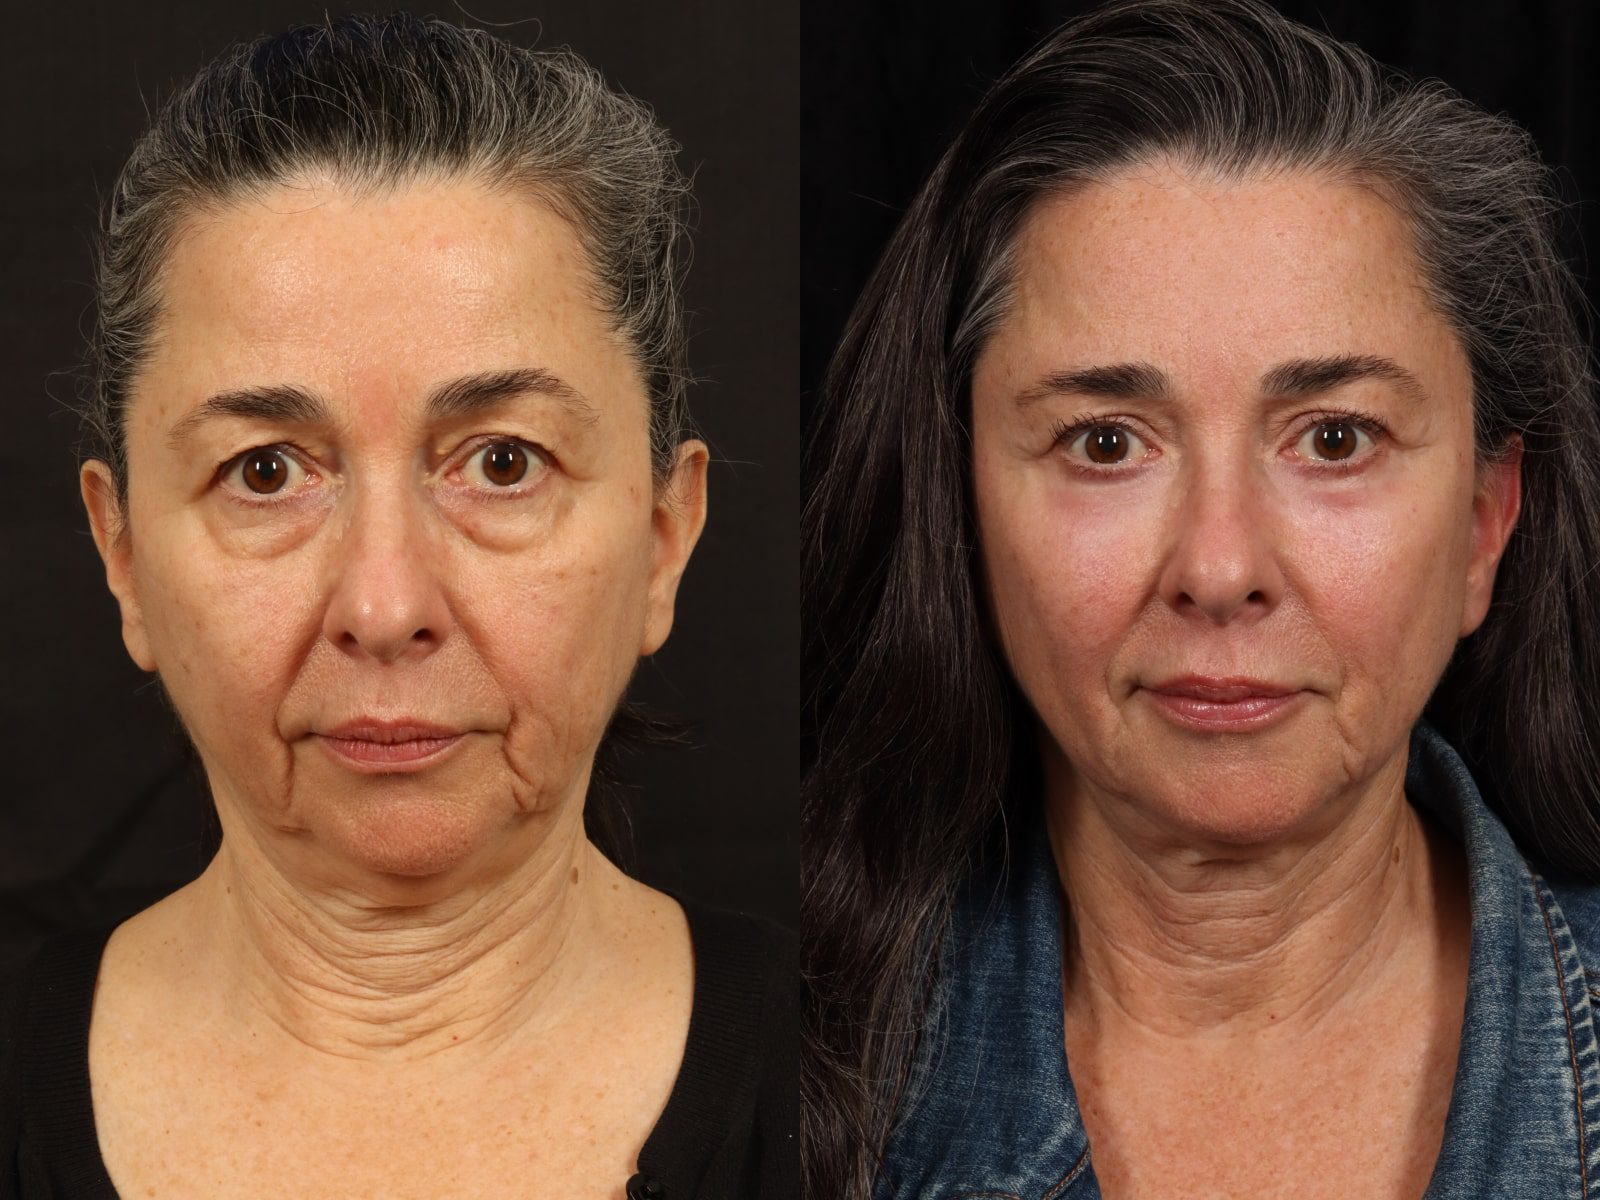 Mid Facelift Before and After Photos